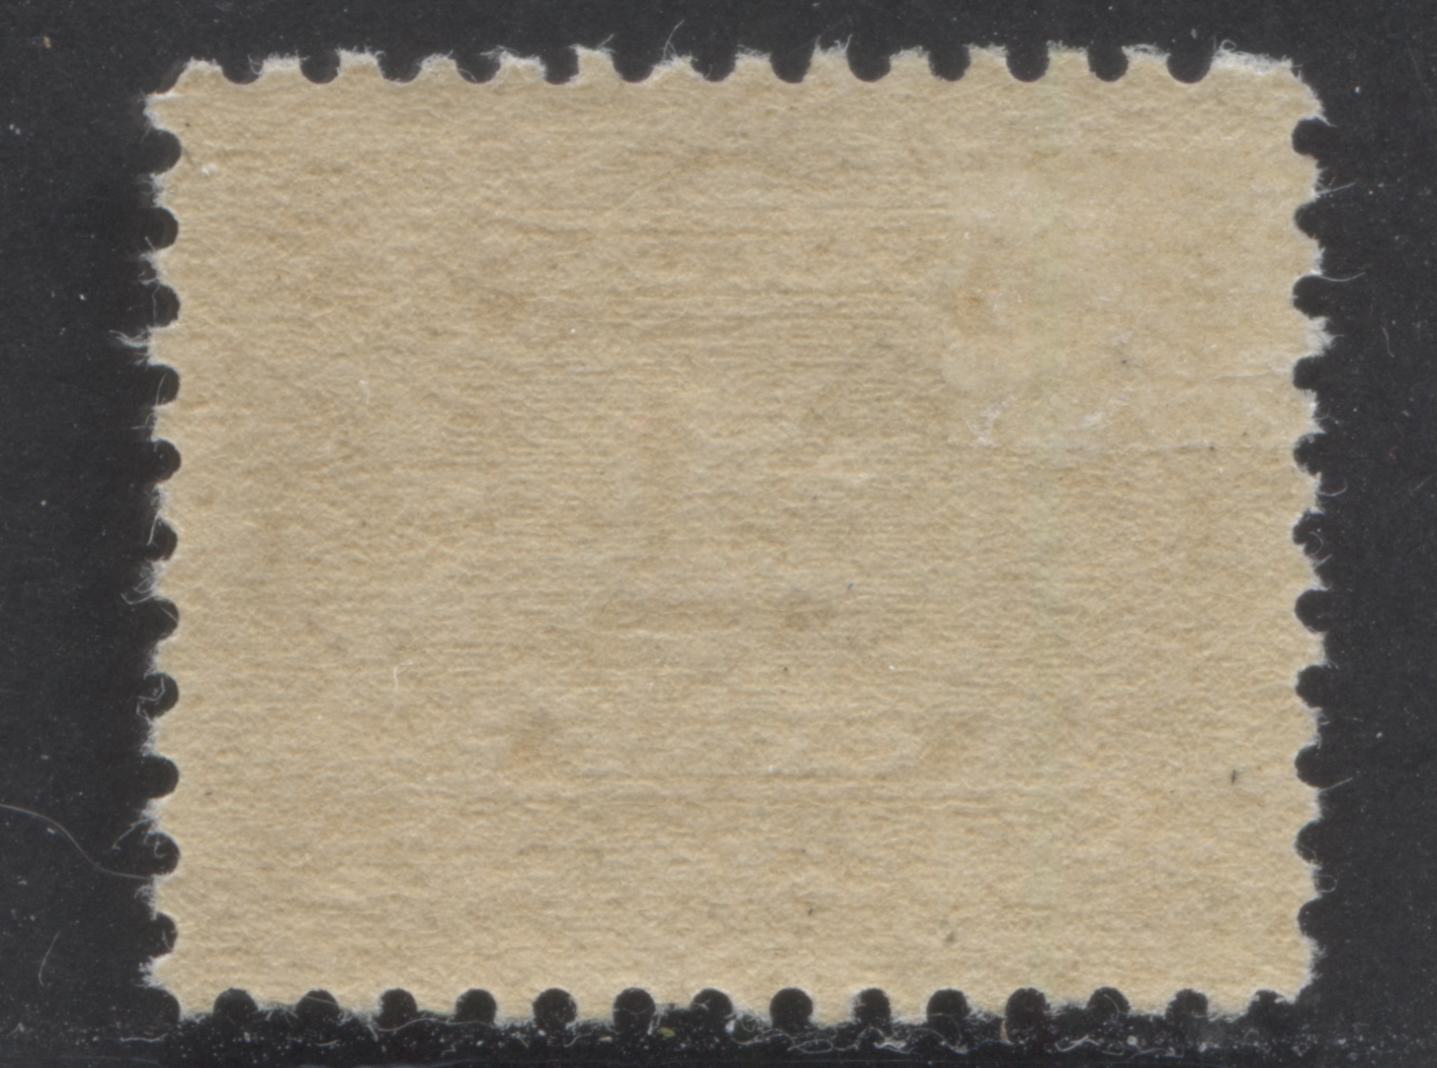 Lot 1 Canada #J1 1c Dull Purple, 1906-1928 First Postage Due Issue, A VFOG Single, Wet Printing